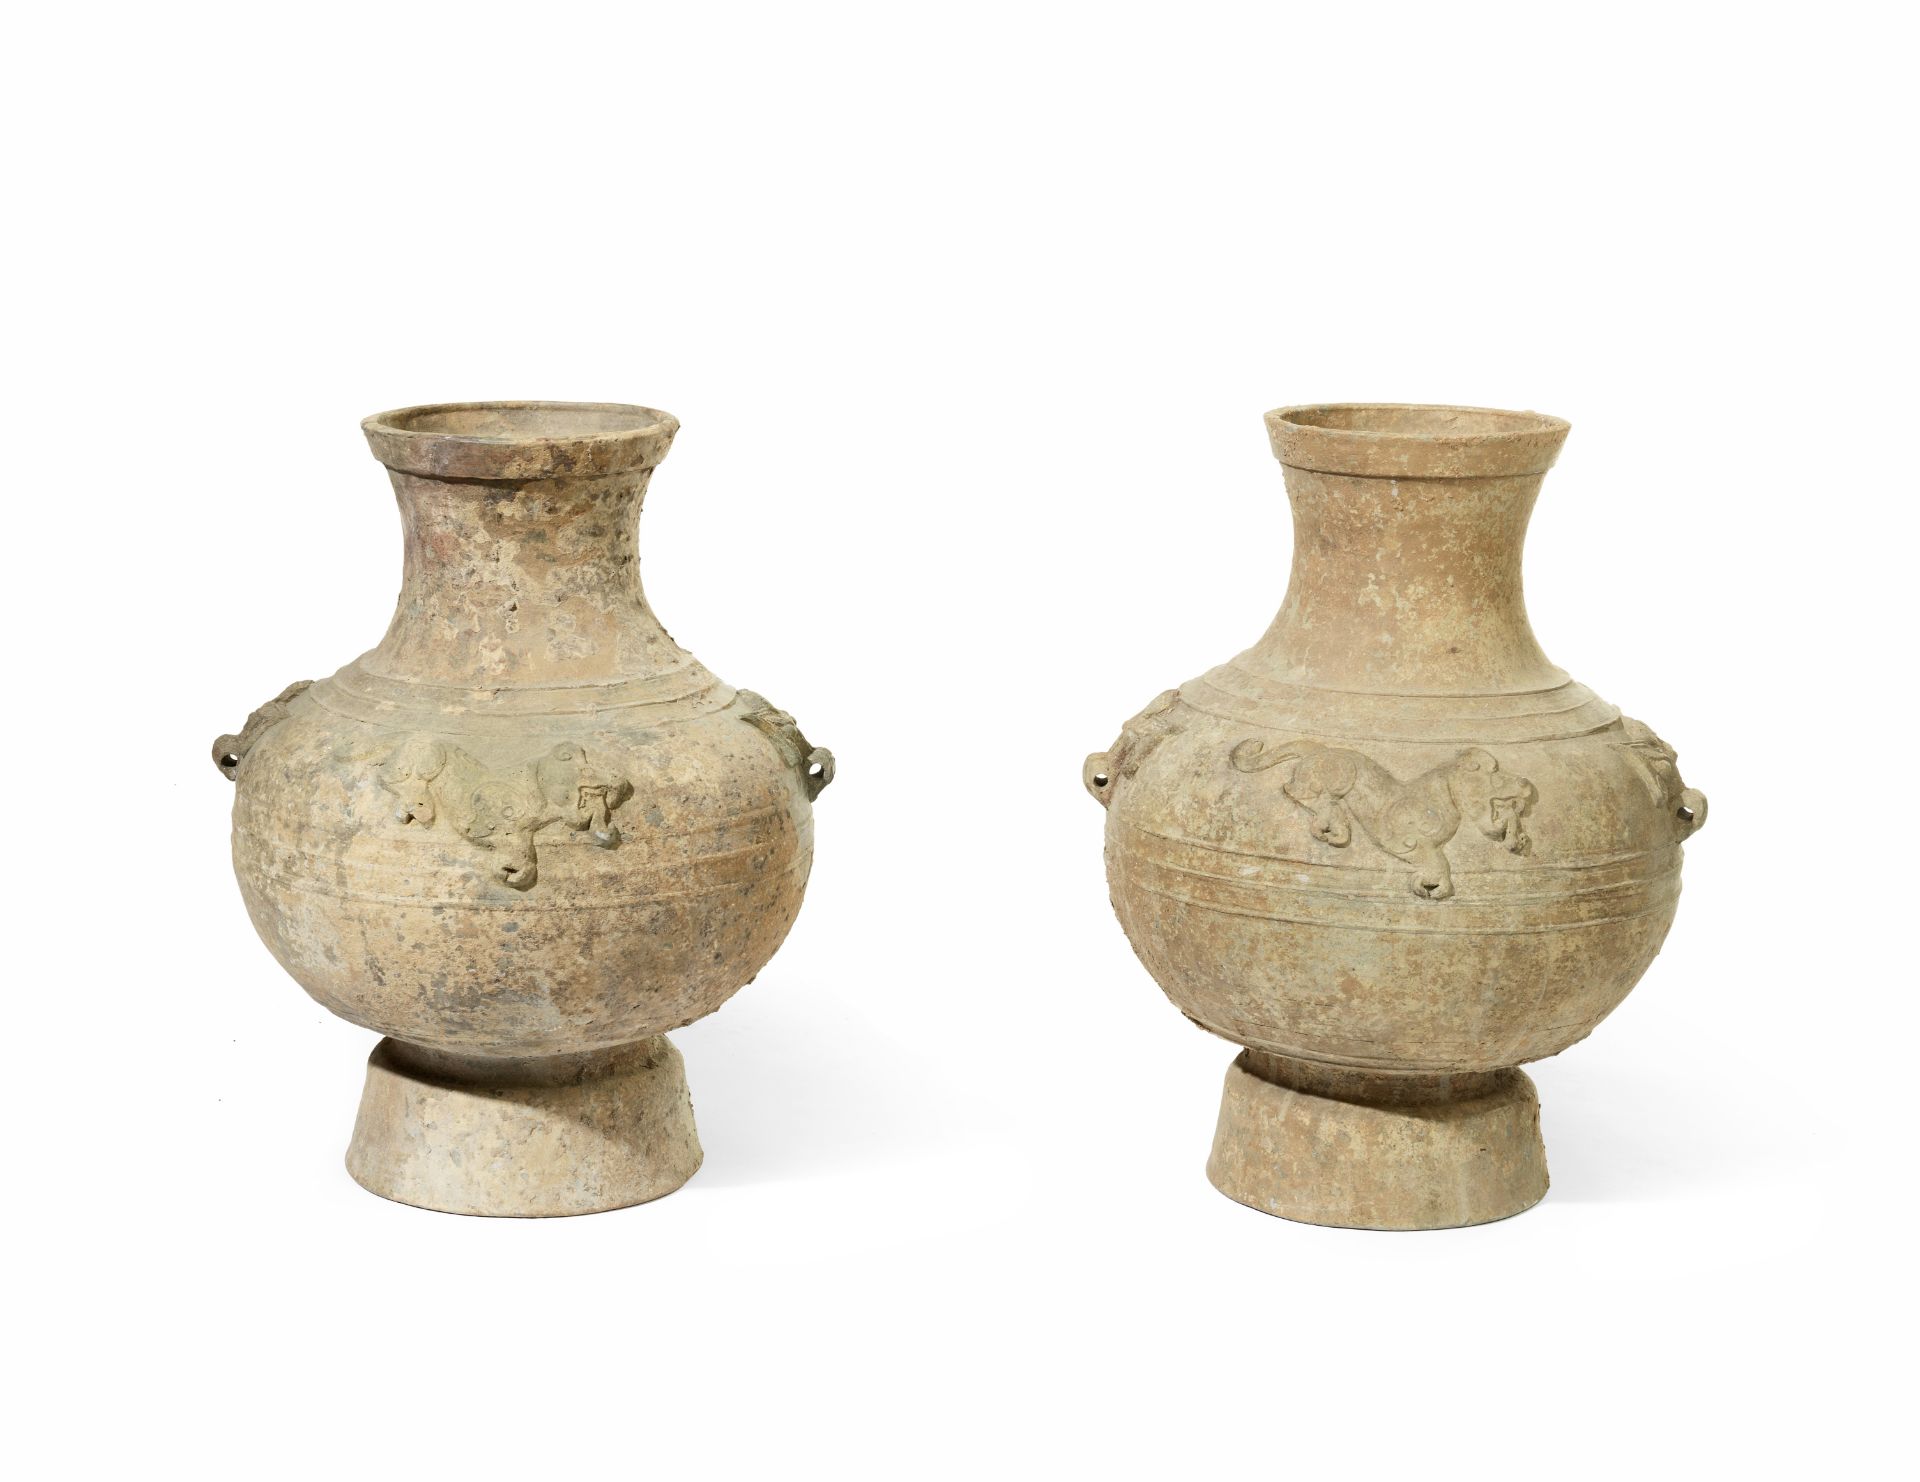 TWO LARGE RELIEF-MOULDED HAN-STYLE JARS (2)